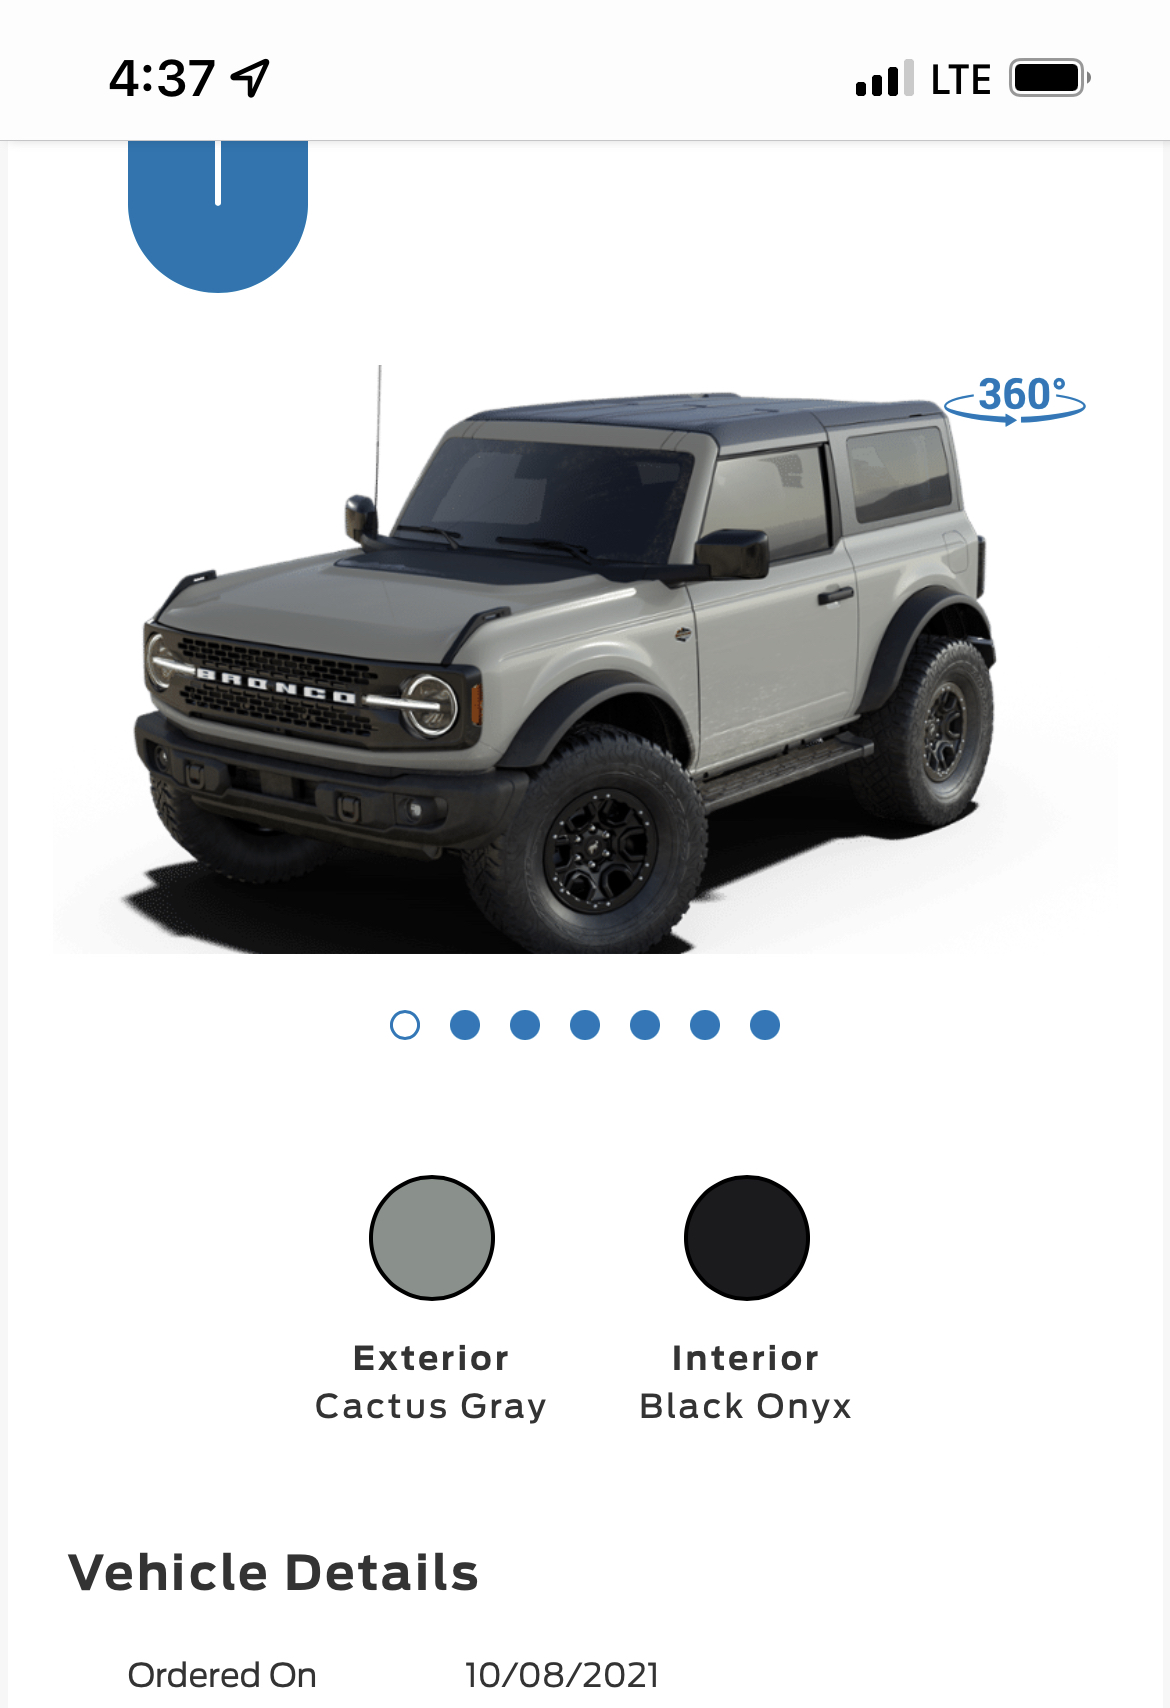 Ford Bronco [SCHEDULING NOW 12/16] ⏱ 2022 Bronco Scheduling Next Week (12/13) For Build Weeks 2/14 and 2/21 CC1943B9-9F45-4F4E-B54F-0B48EDE7E3B9